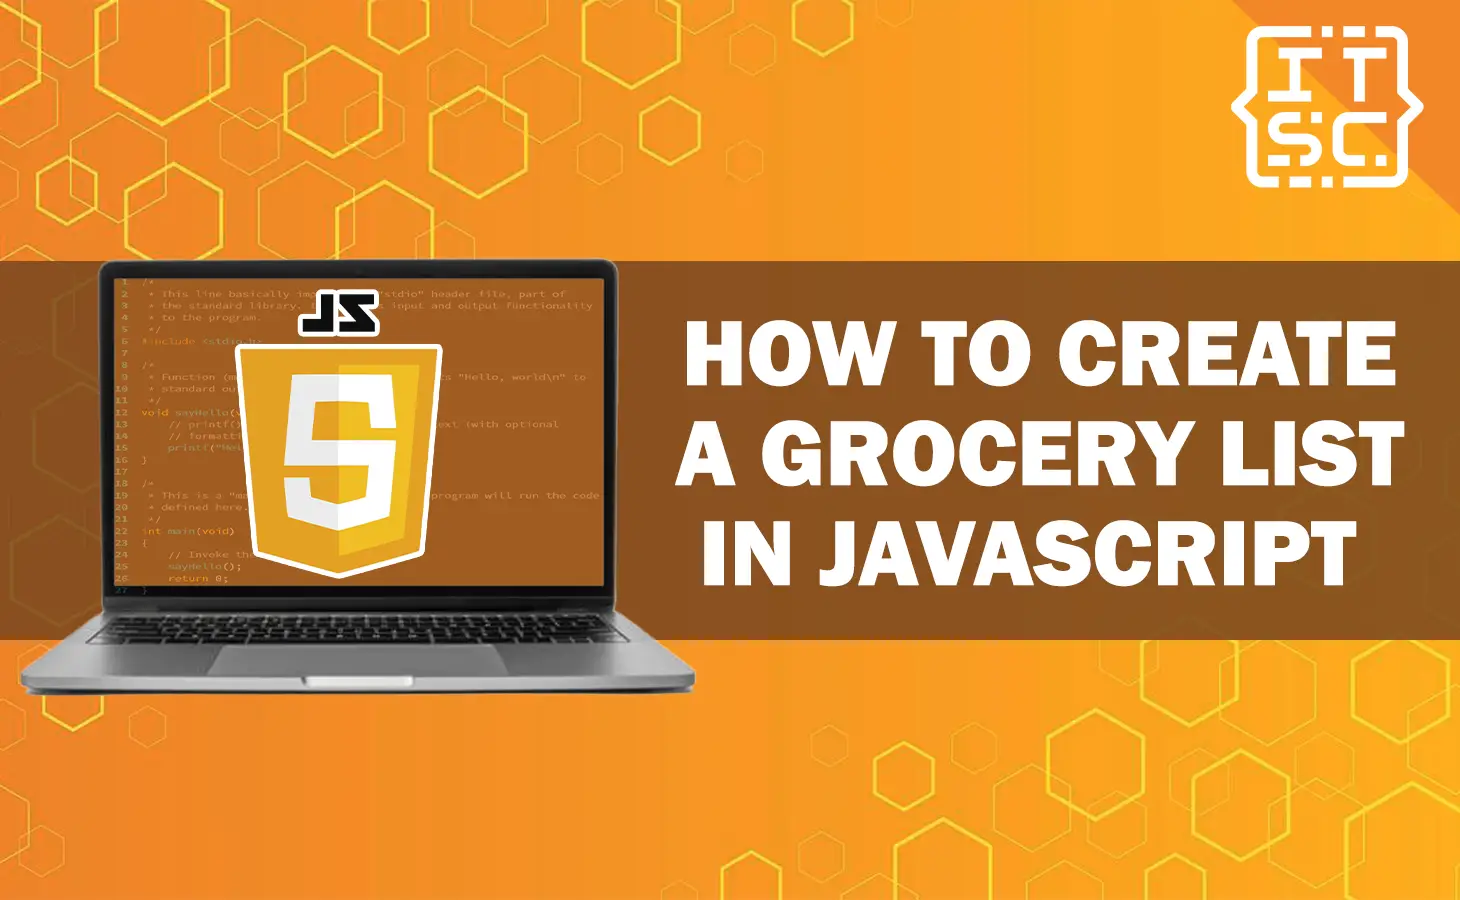 How to Create a Grocery List in JavaScript?